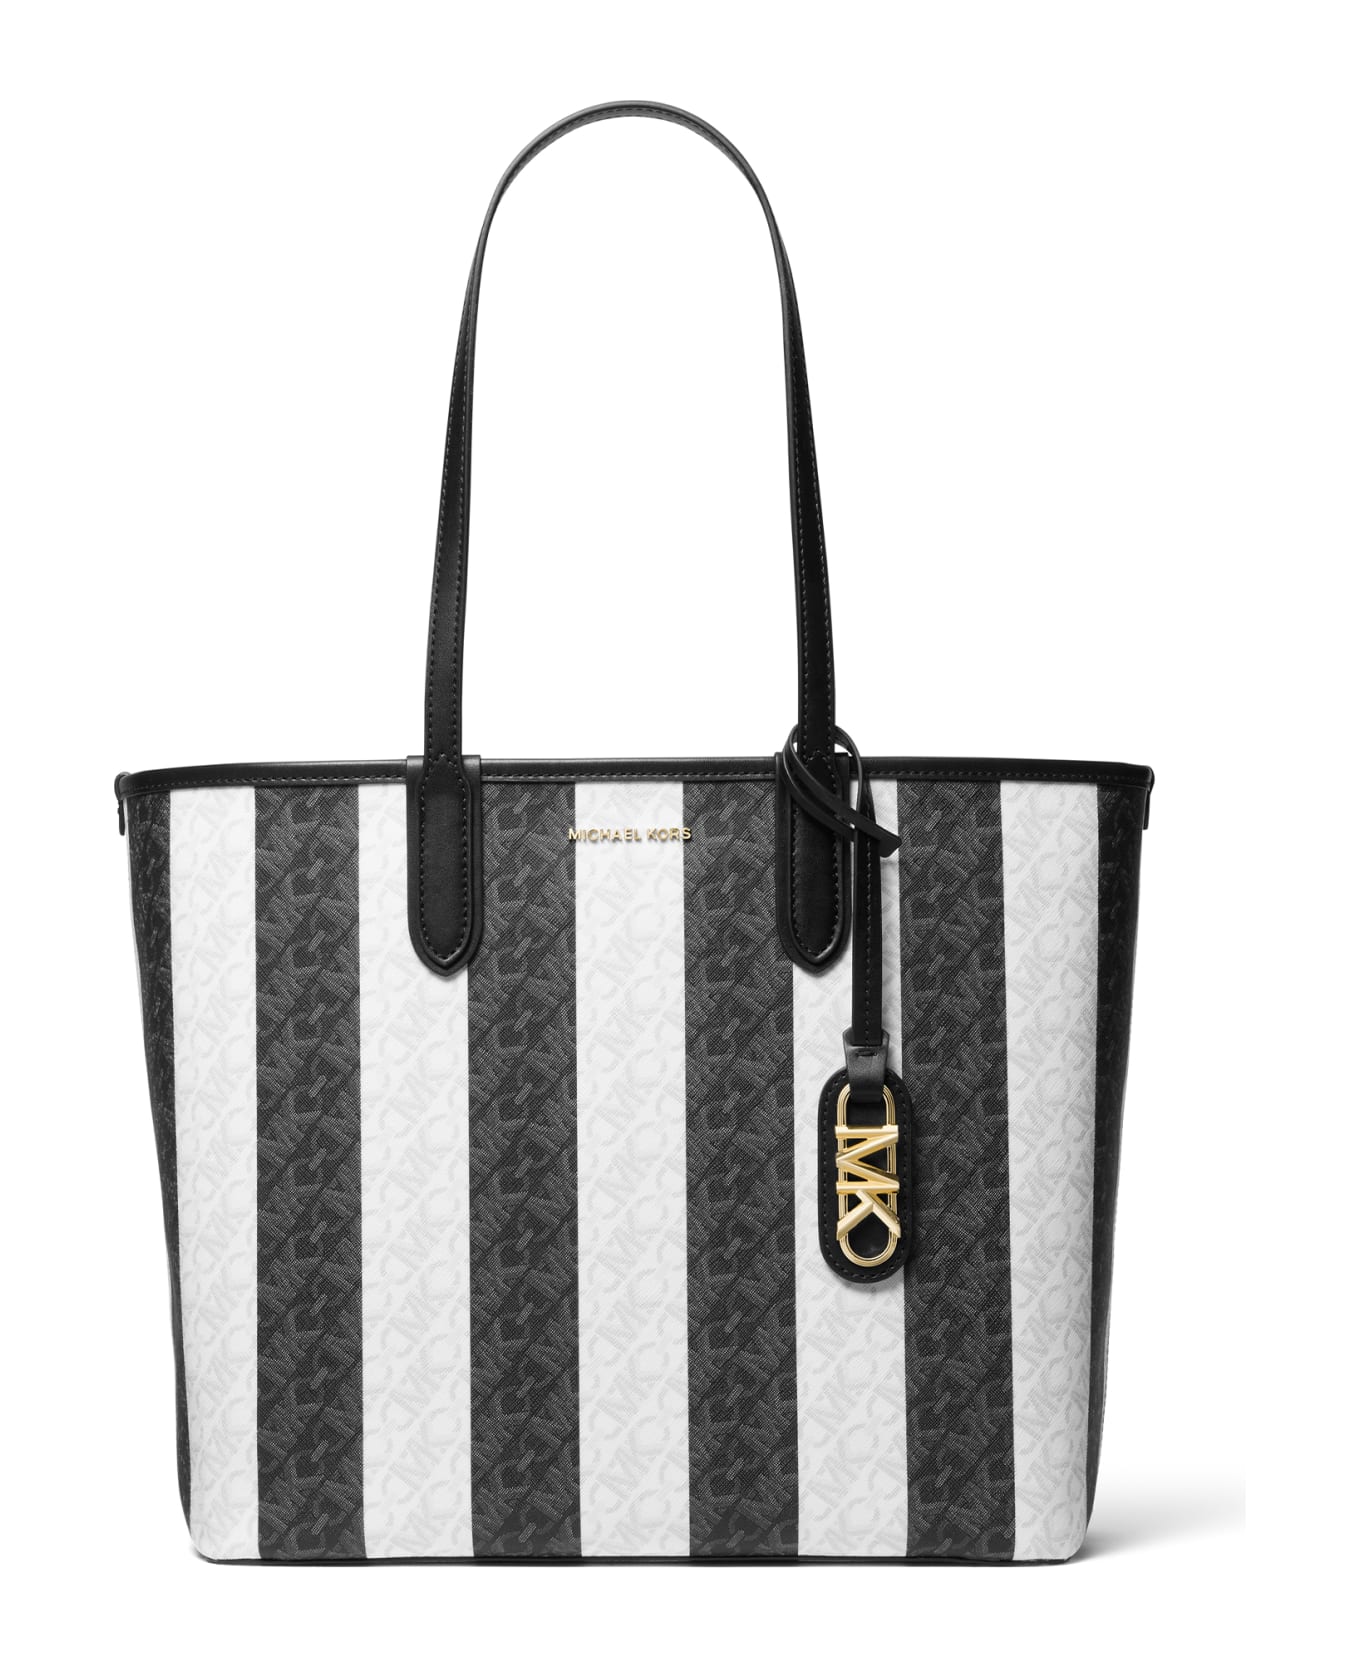 Michael Kors Striped Shopping Bag With Logo - BLK OPTIC WHITE トートバッグ